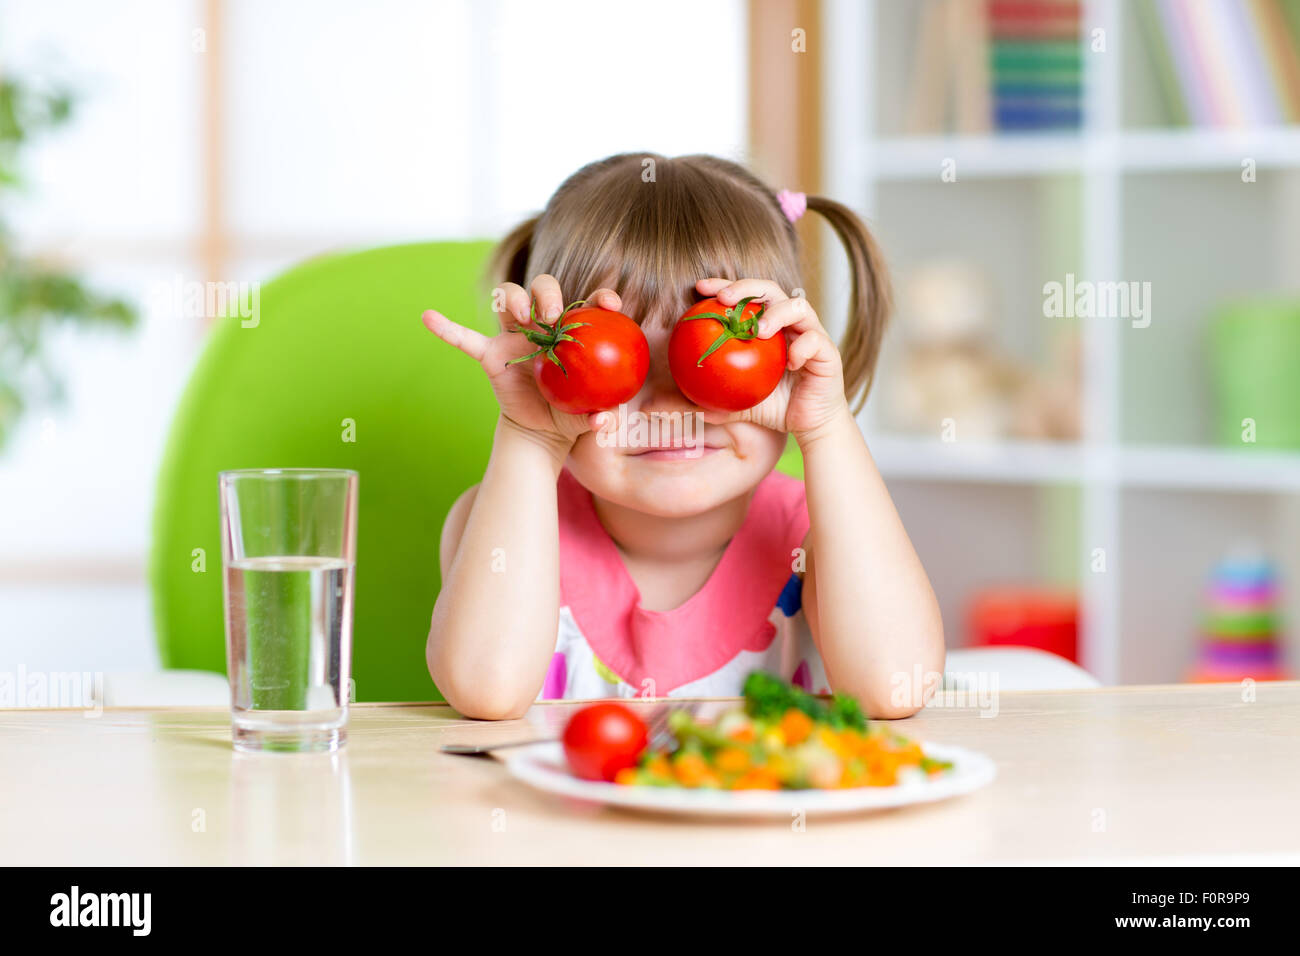 little girl playing with vegetables Stock Photo